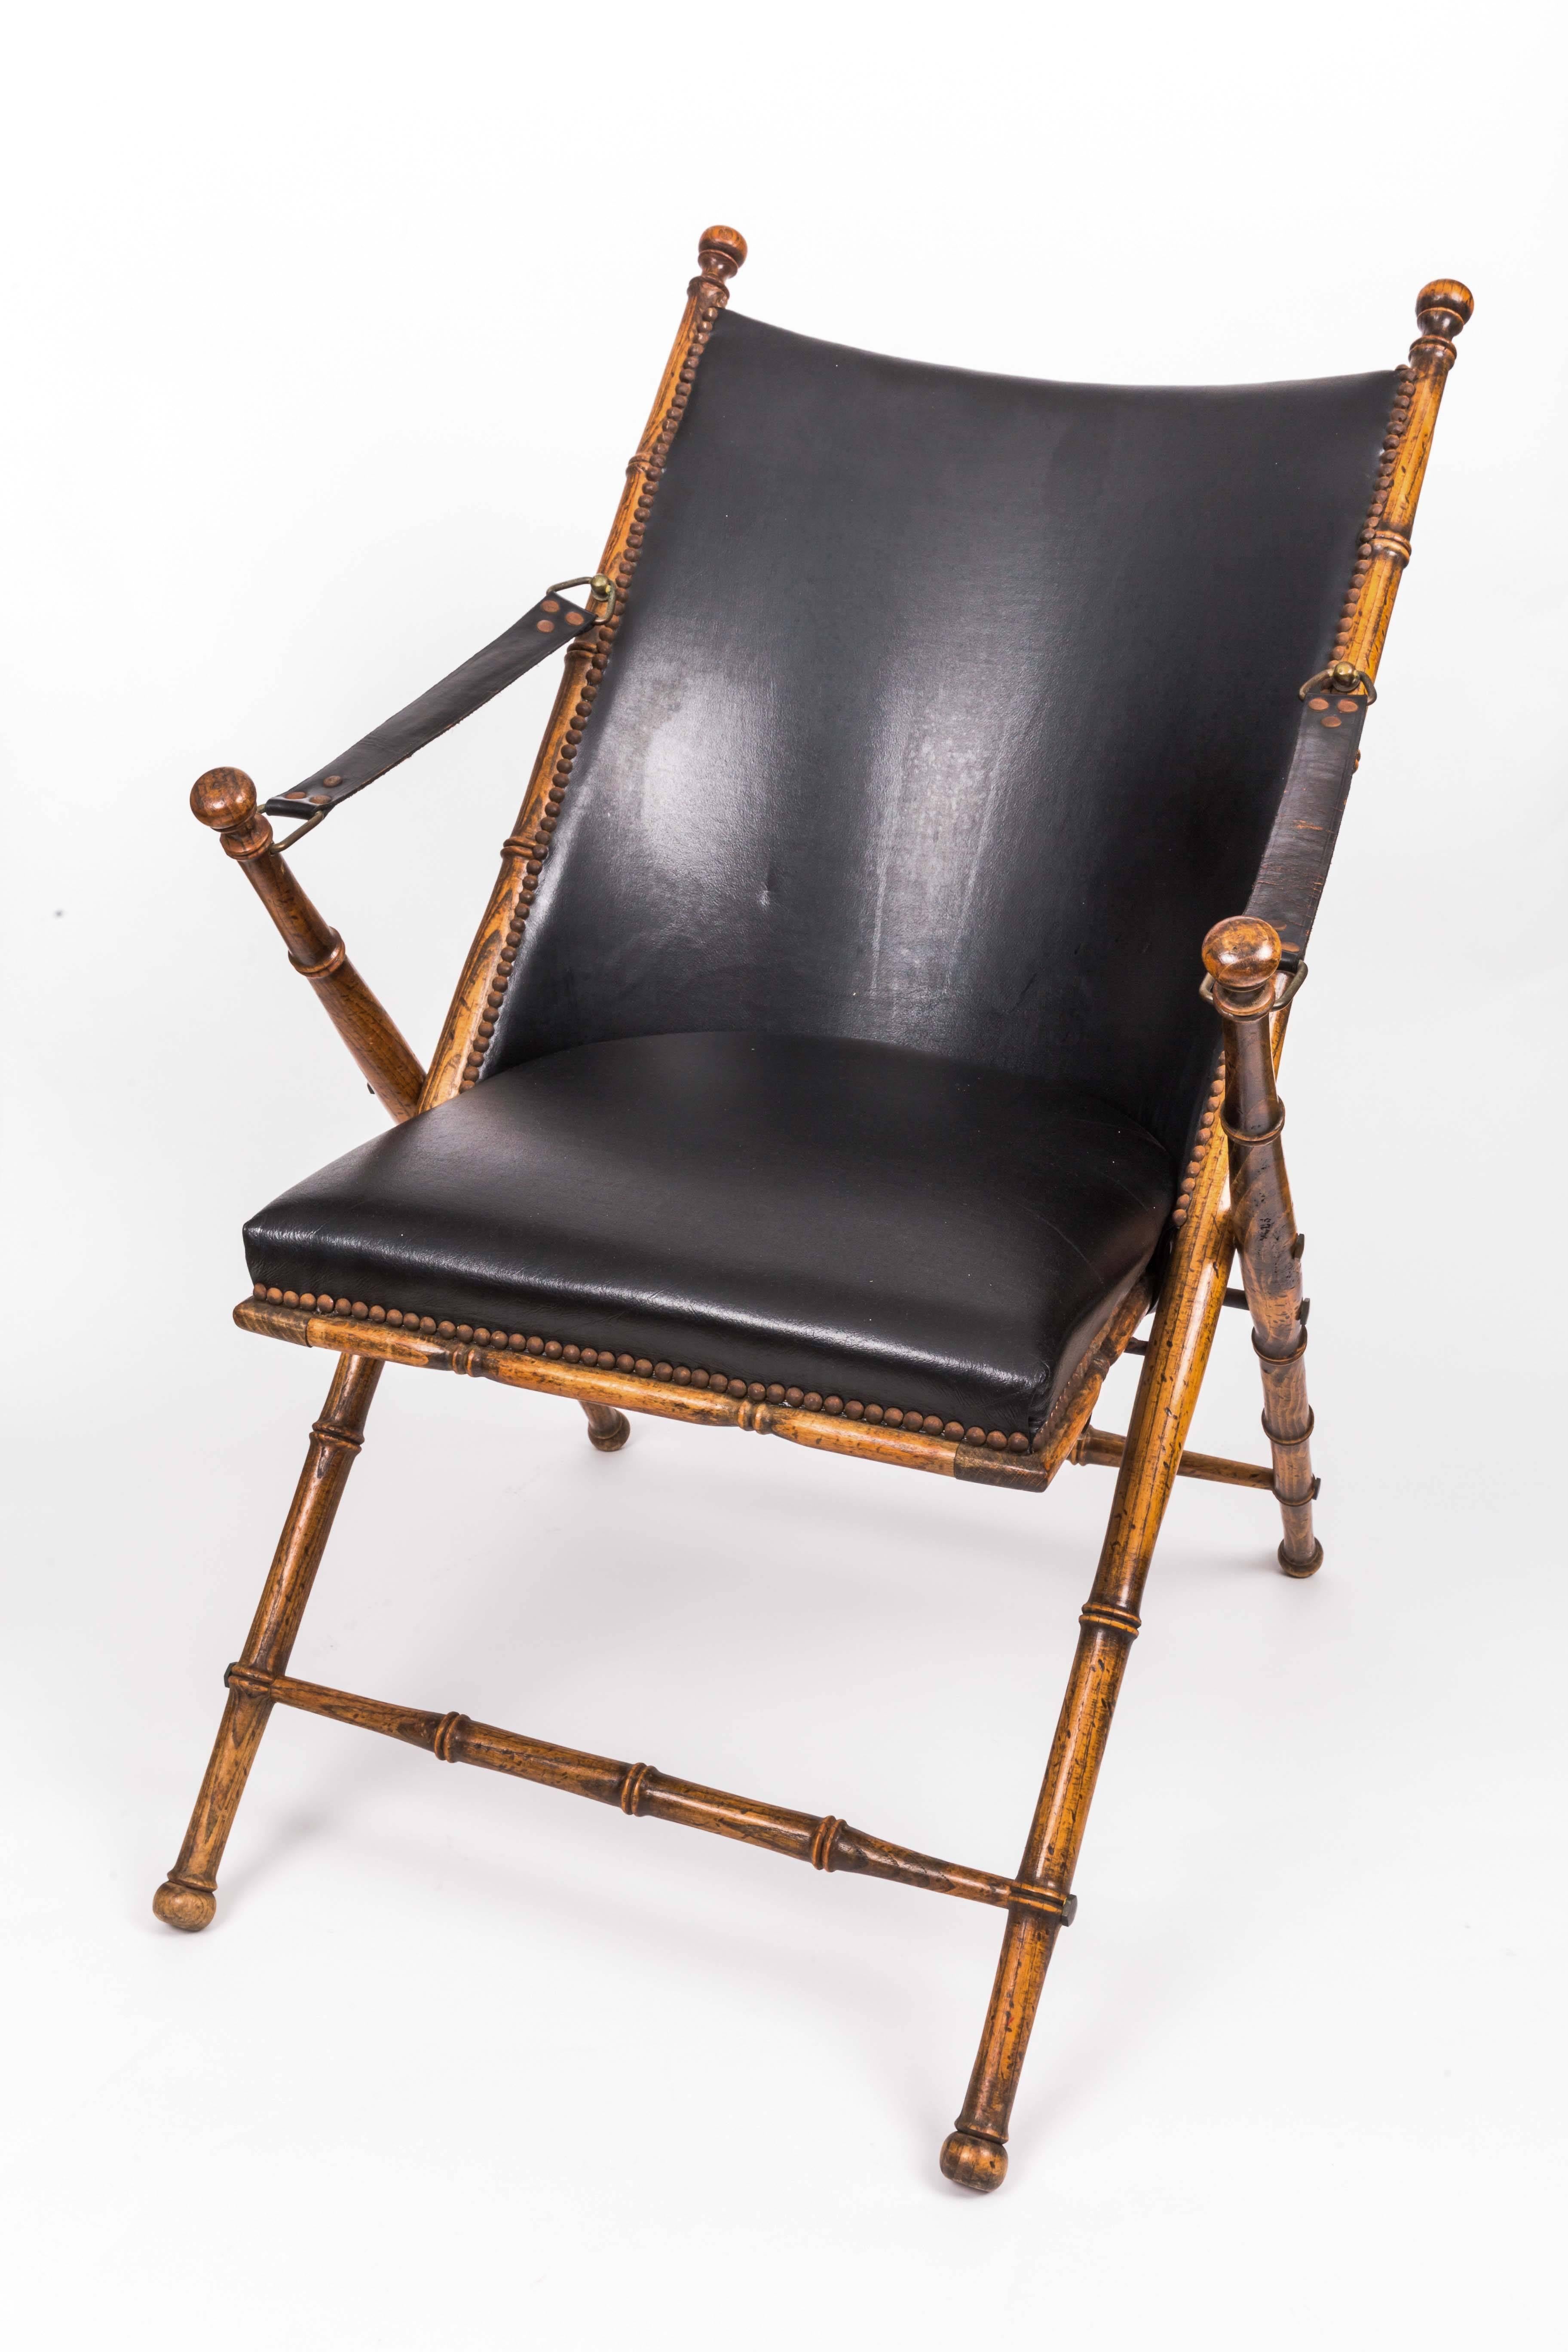 British Colonial Campaign Chair